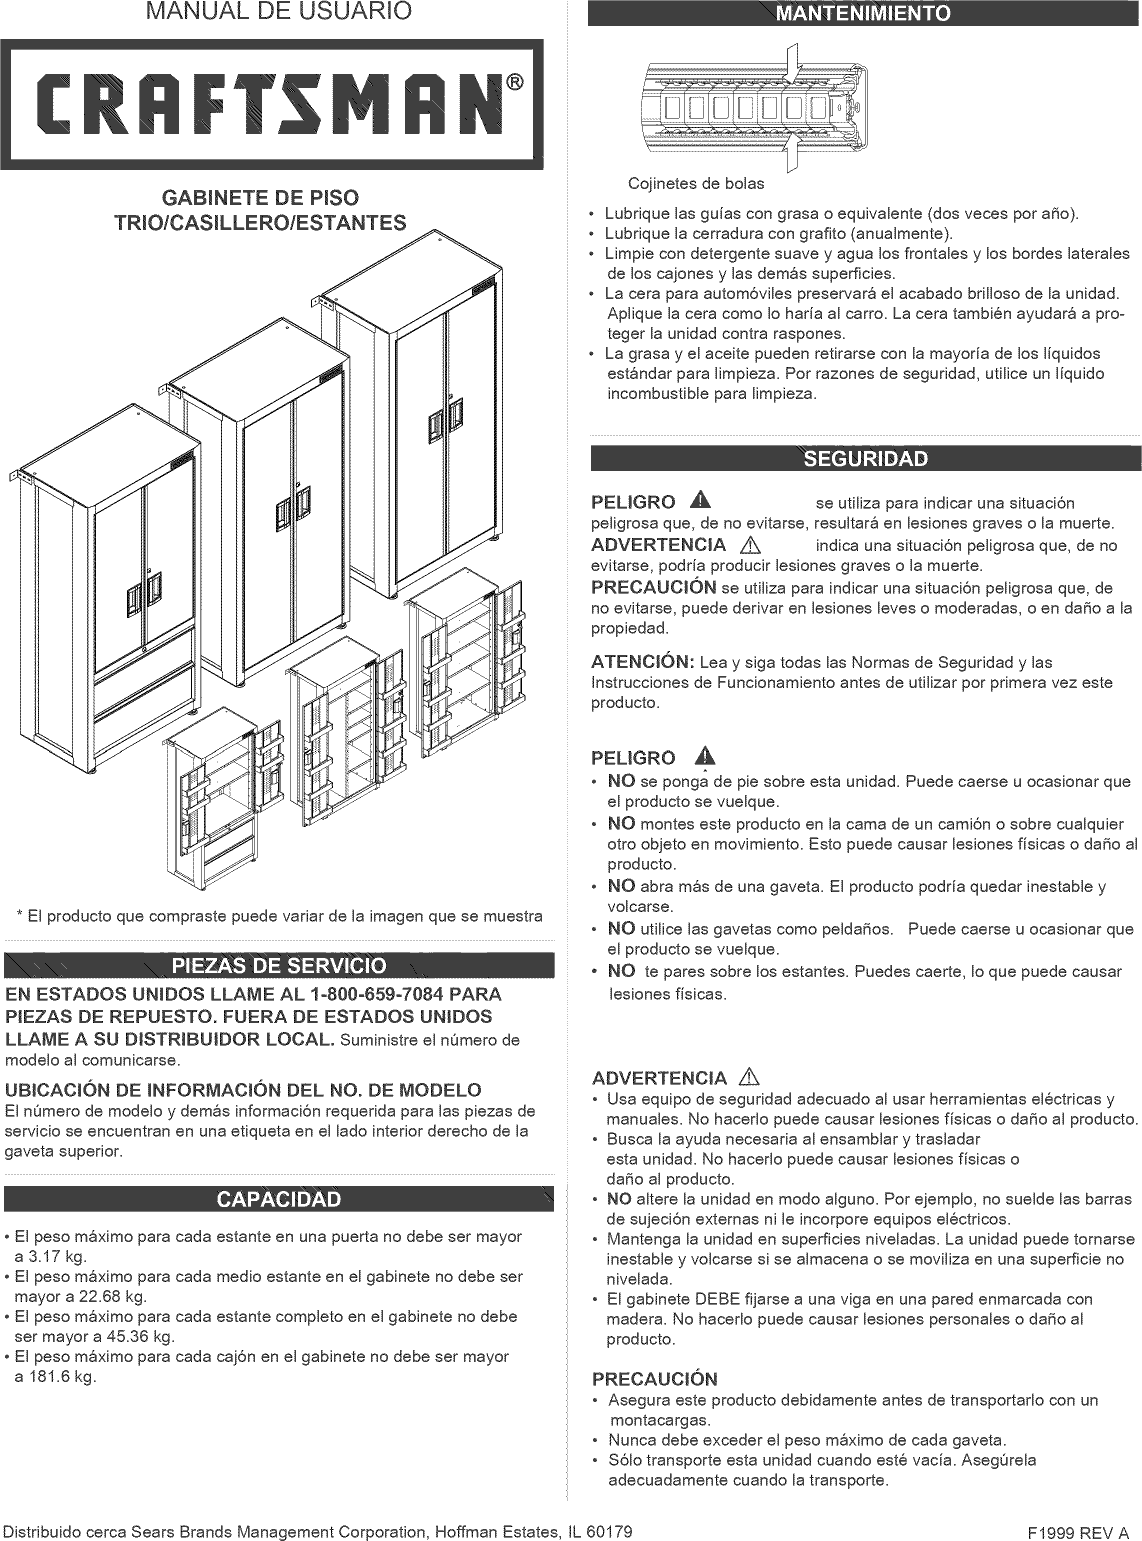 Page 5 of 8 - Craftsman 70646630 User Manual  FLOOR TOOL CABINET - Manuals And Guides 1409290L